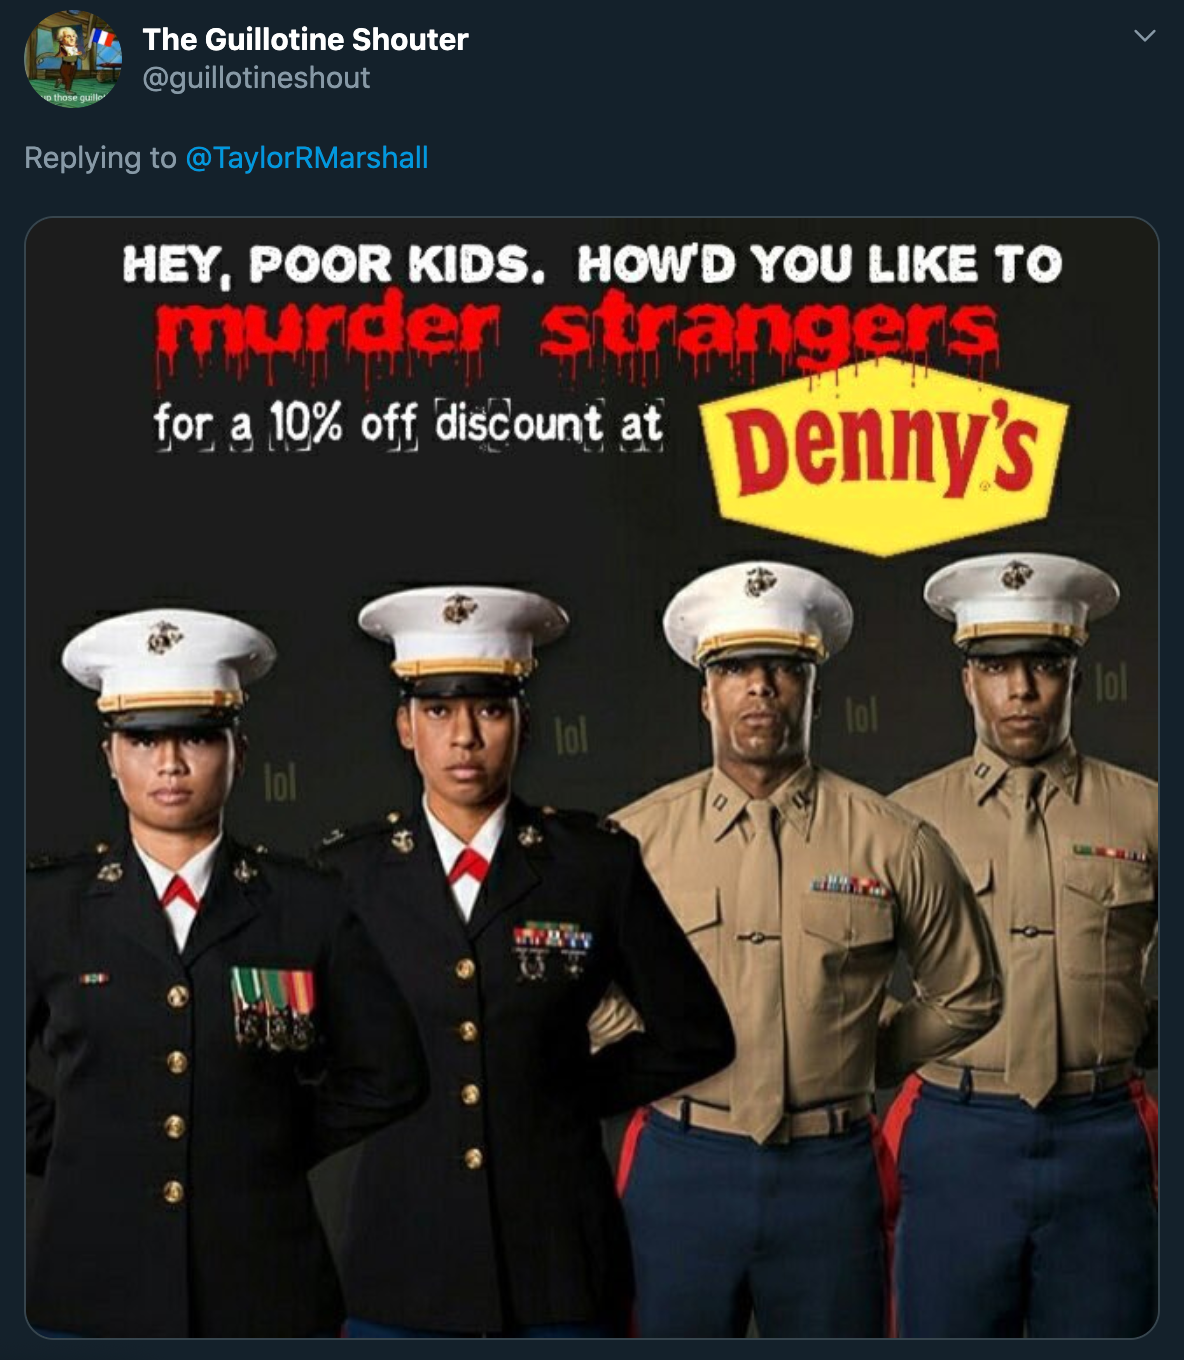 hey poor kids how'd you like to murder strangers for a 10% discount at dennys